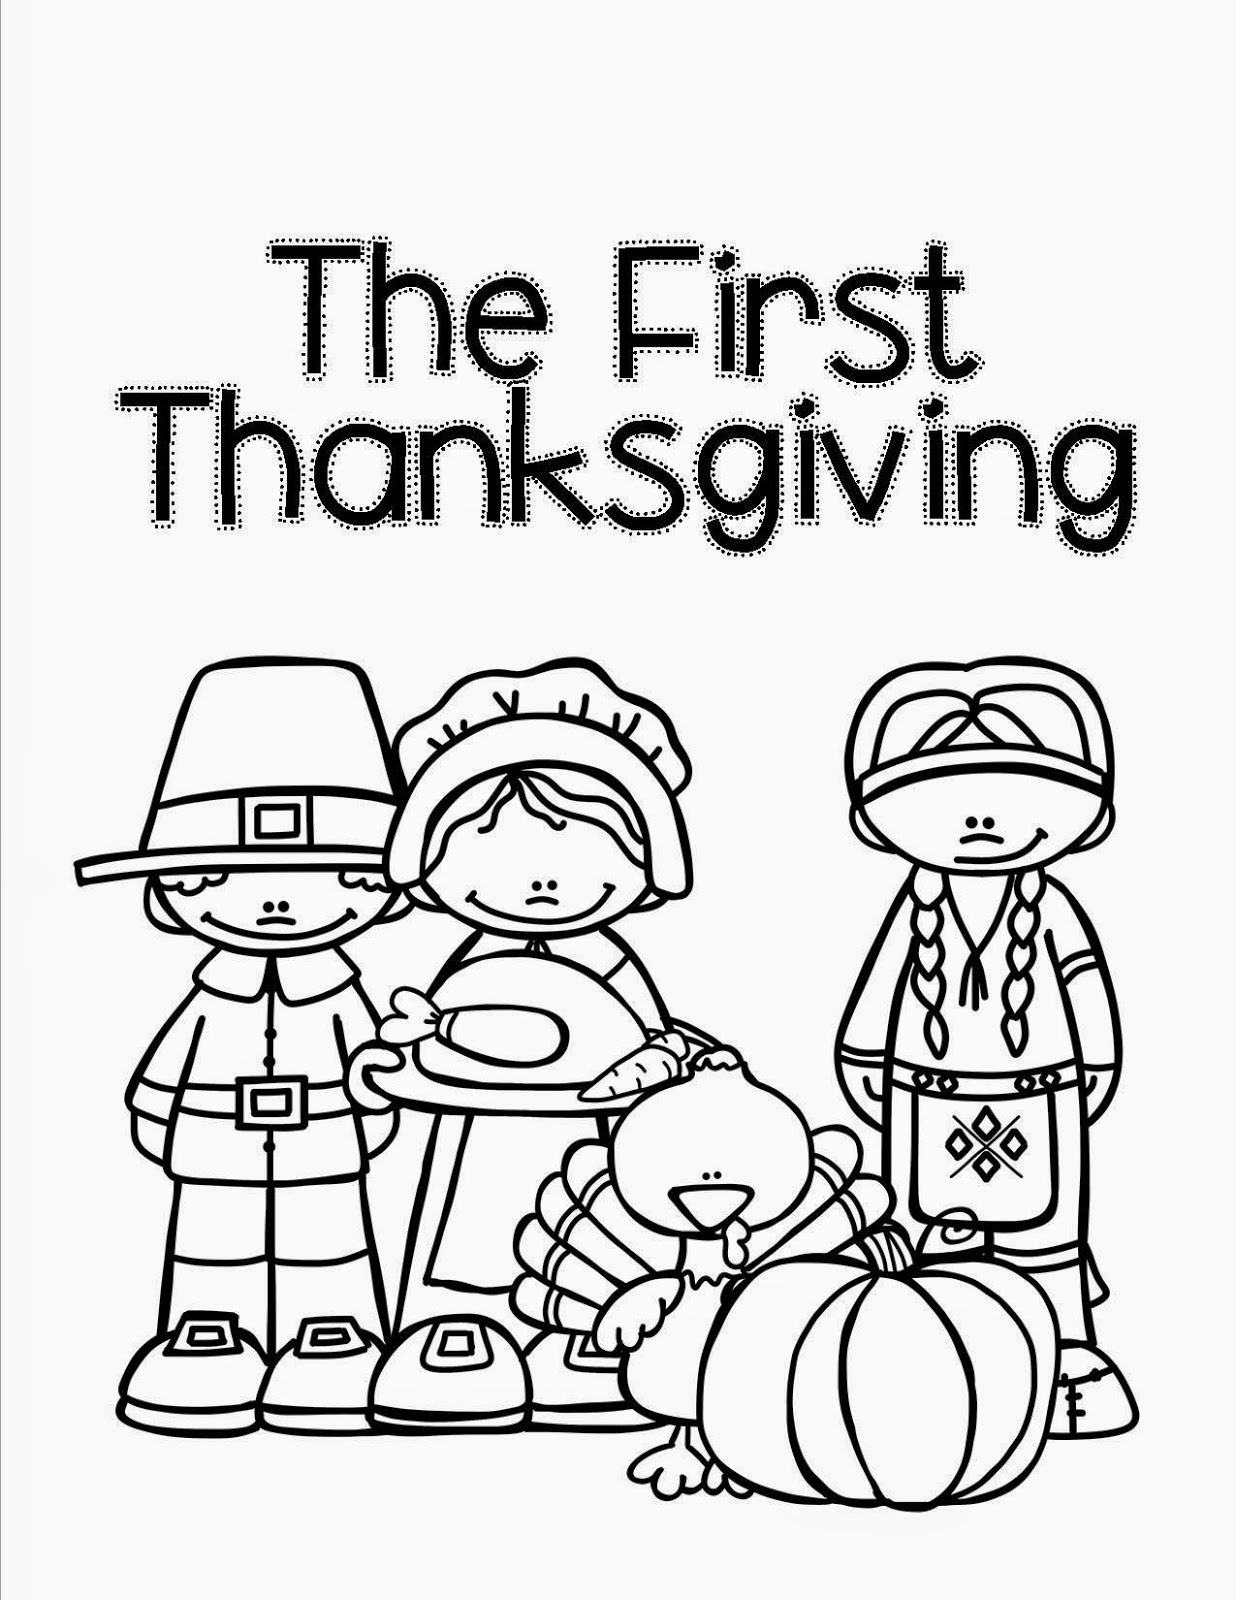 lory-s-2nd-grade-skills-scholastic-thanksgiving-free-printables-for